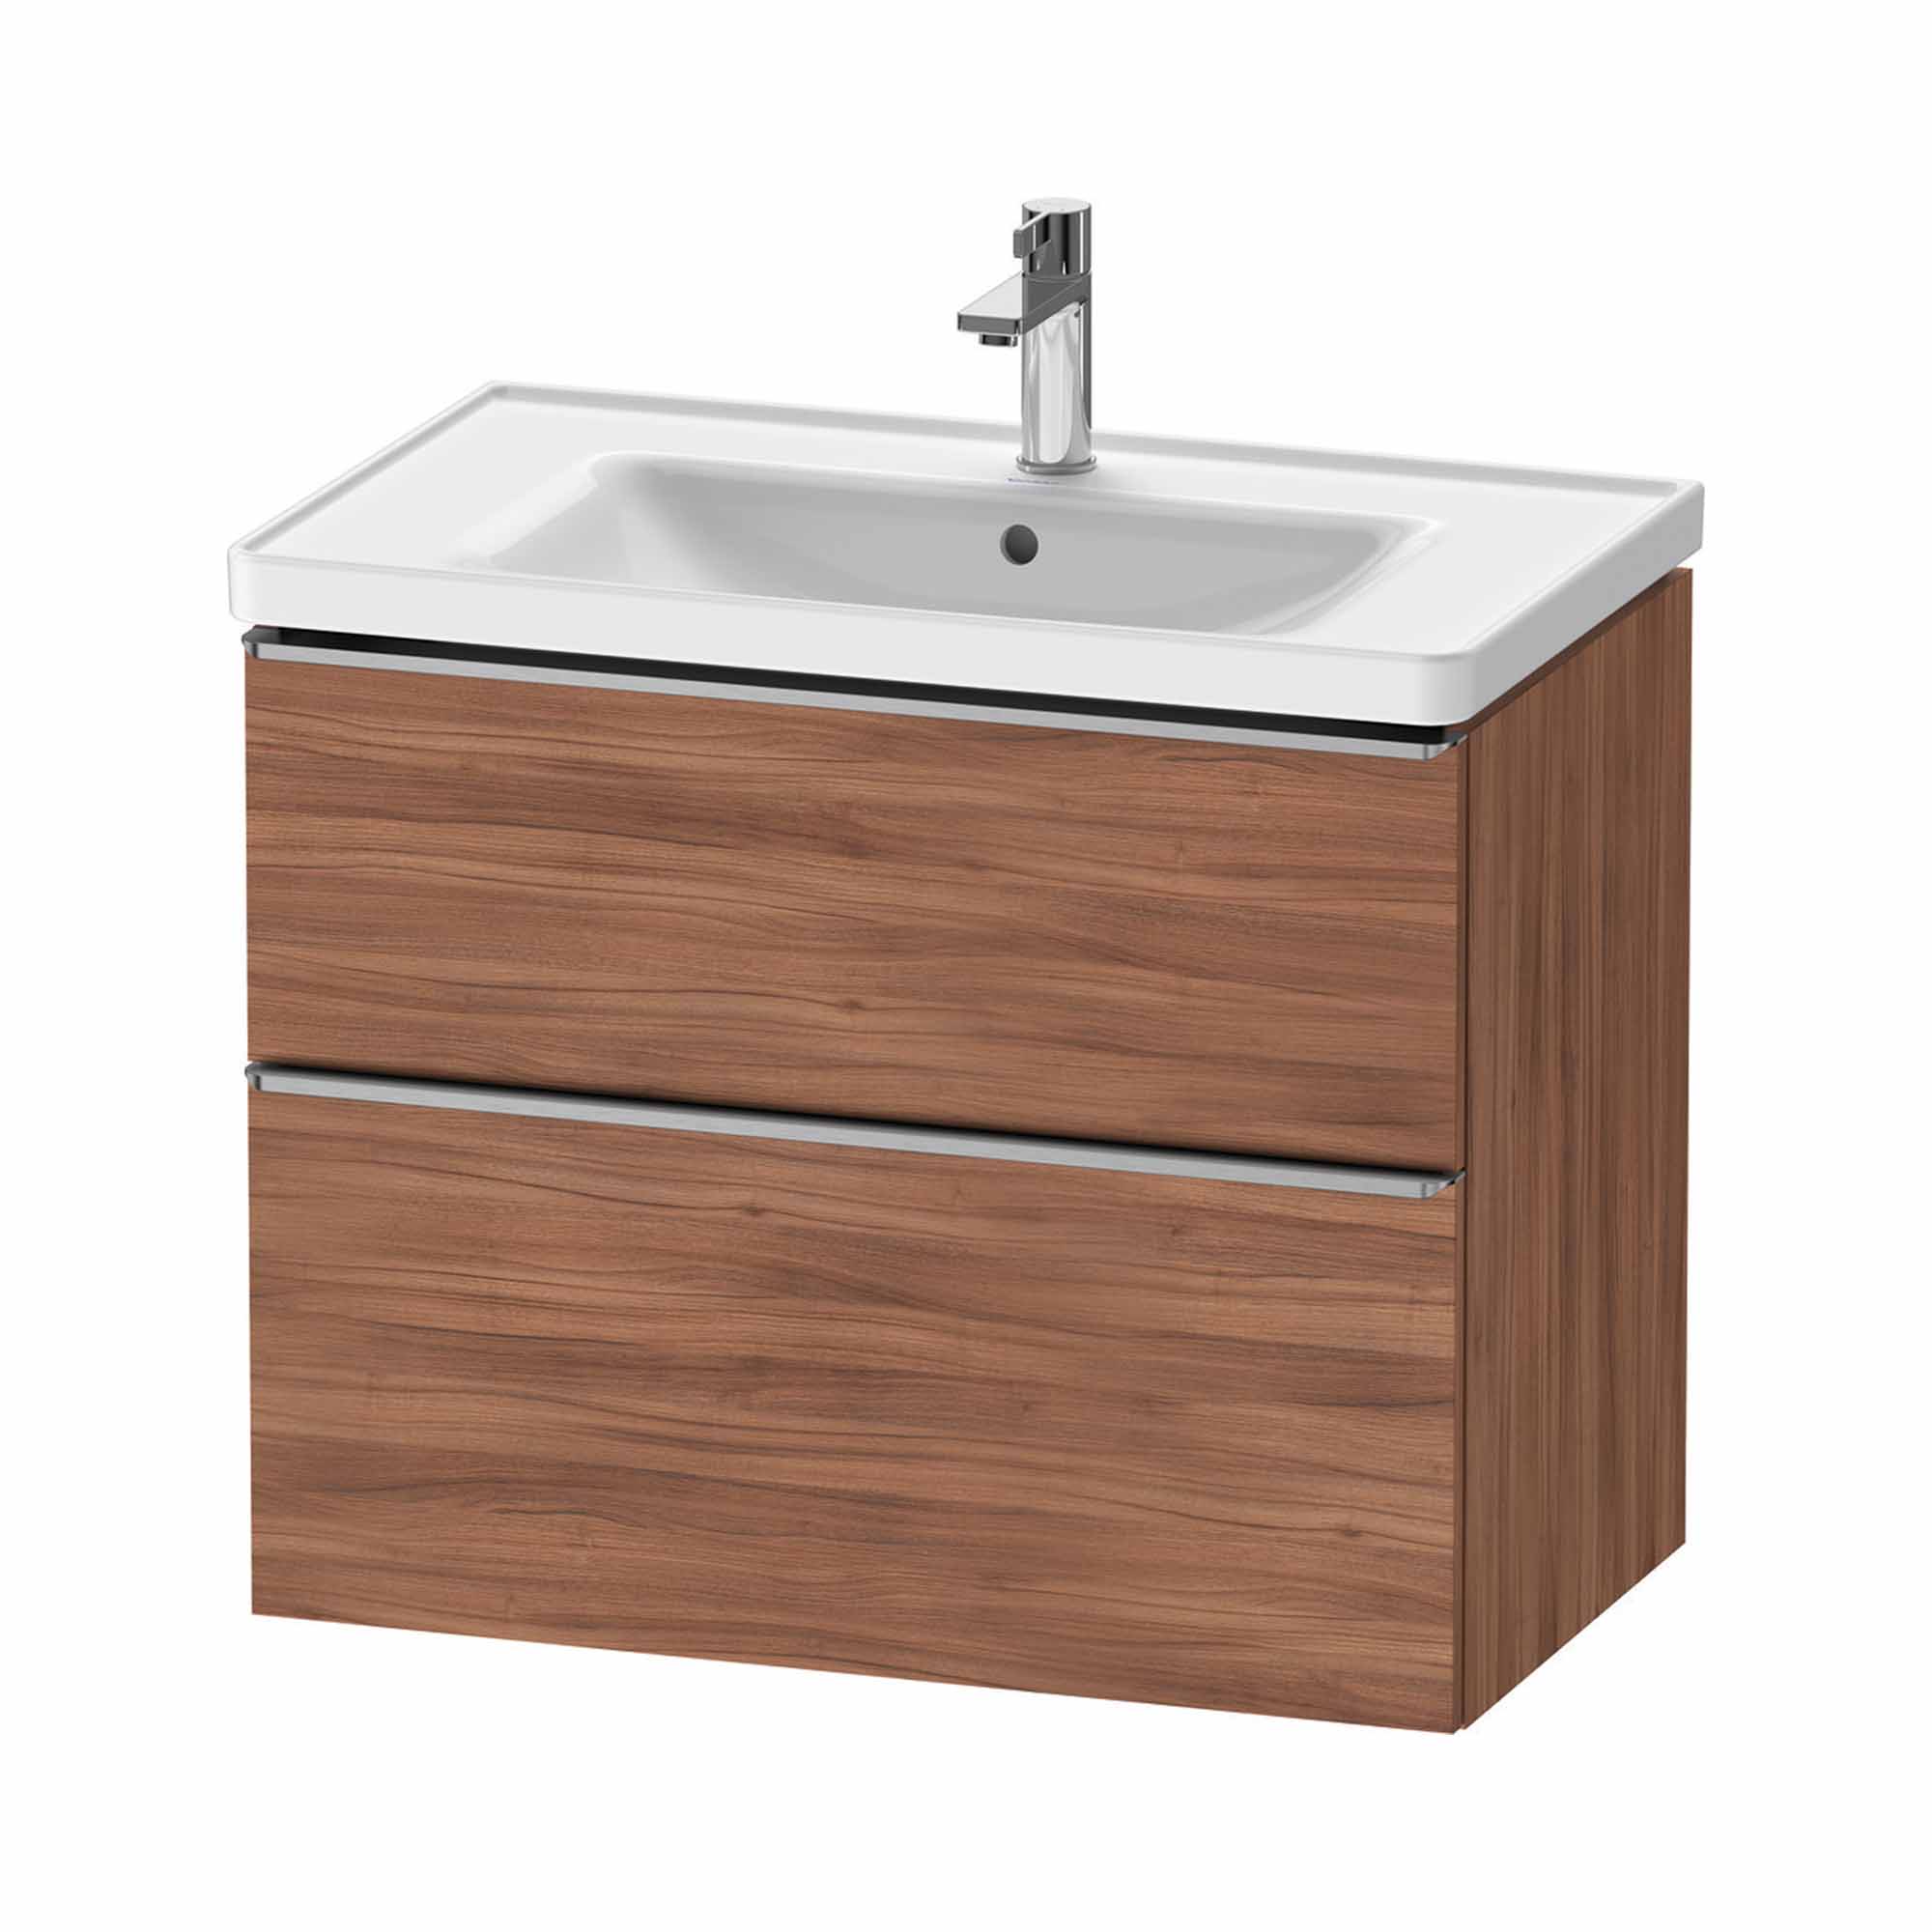 duravit d-neo 800mm wall mounted vanity unit with d-neo basin walnut stainless steel handles